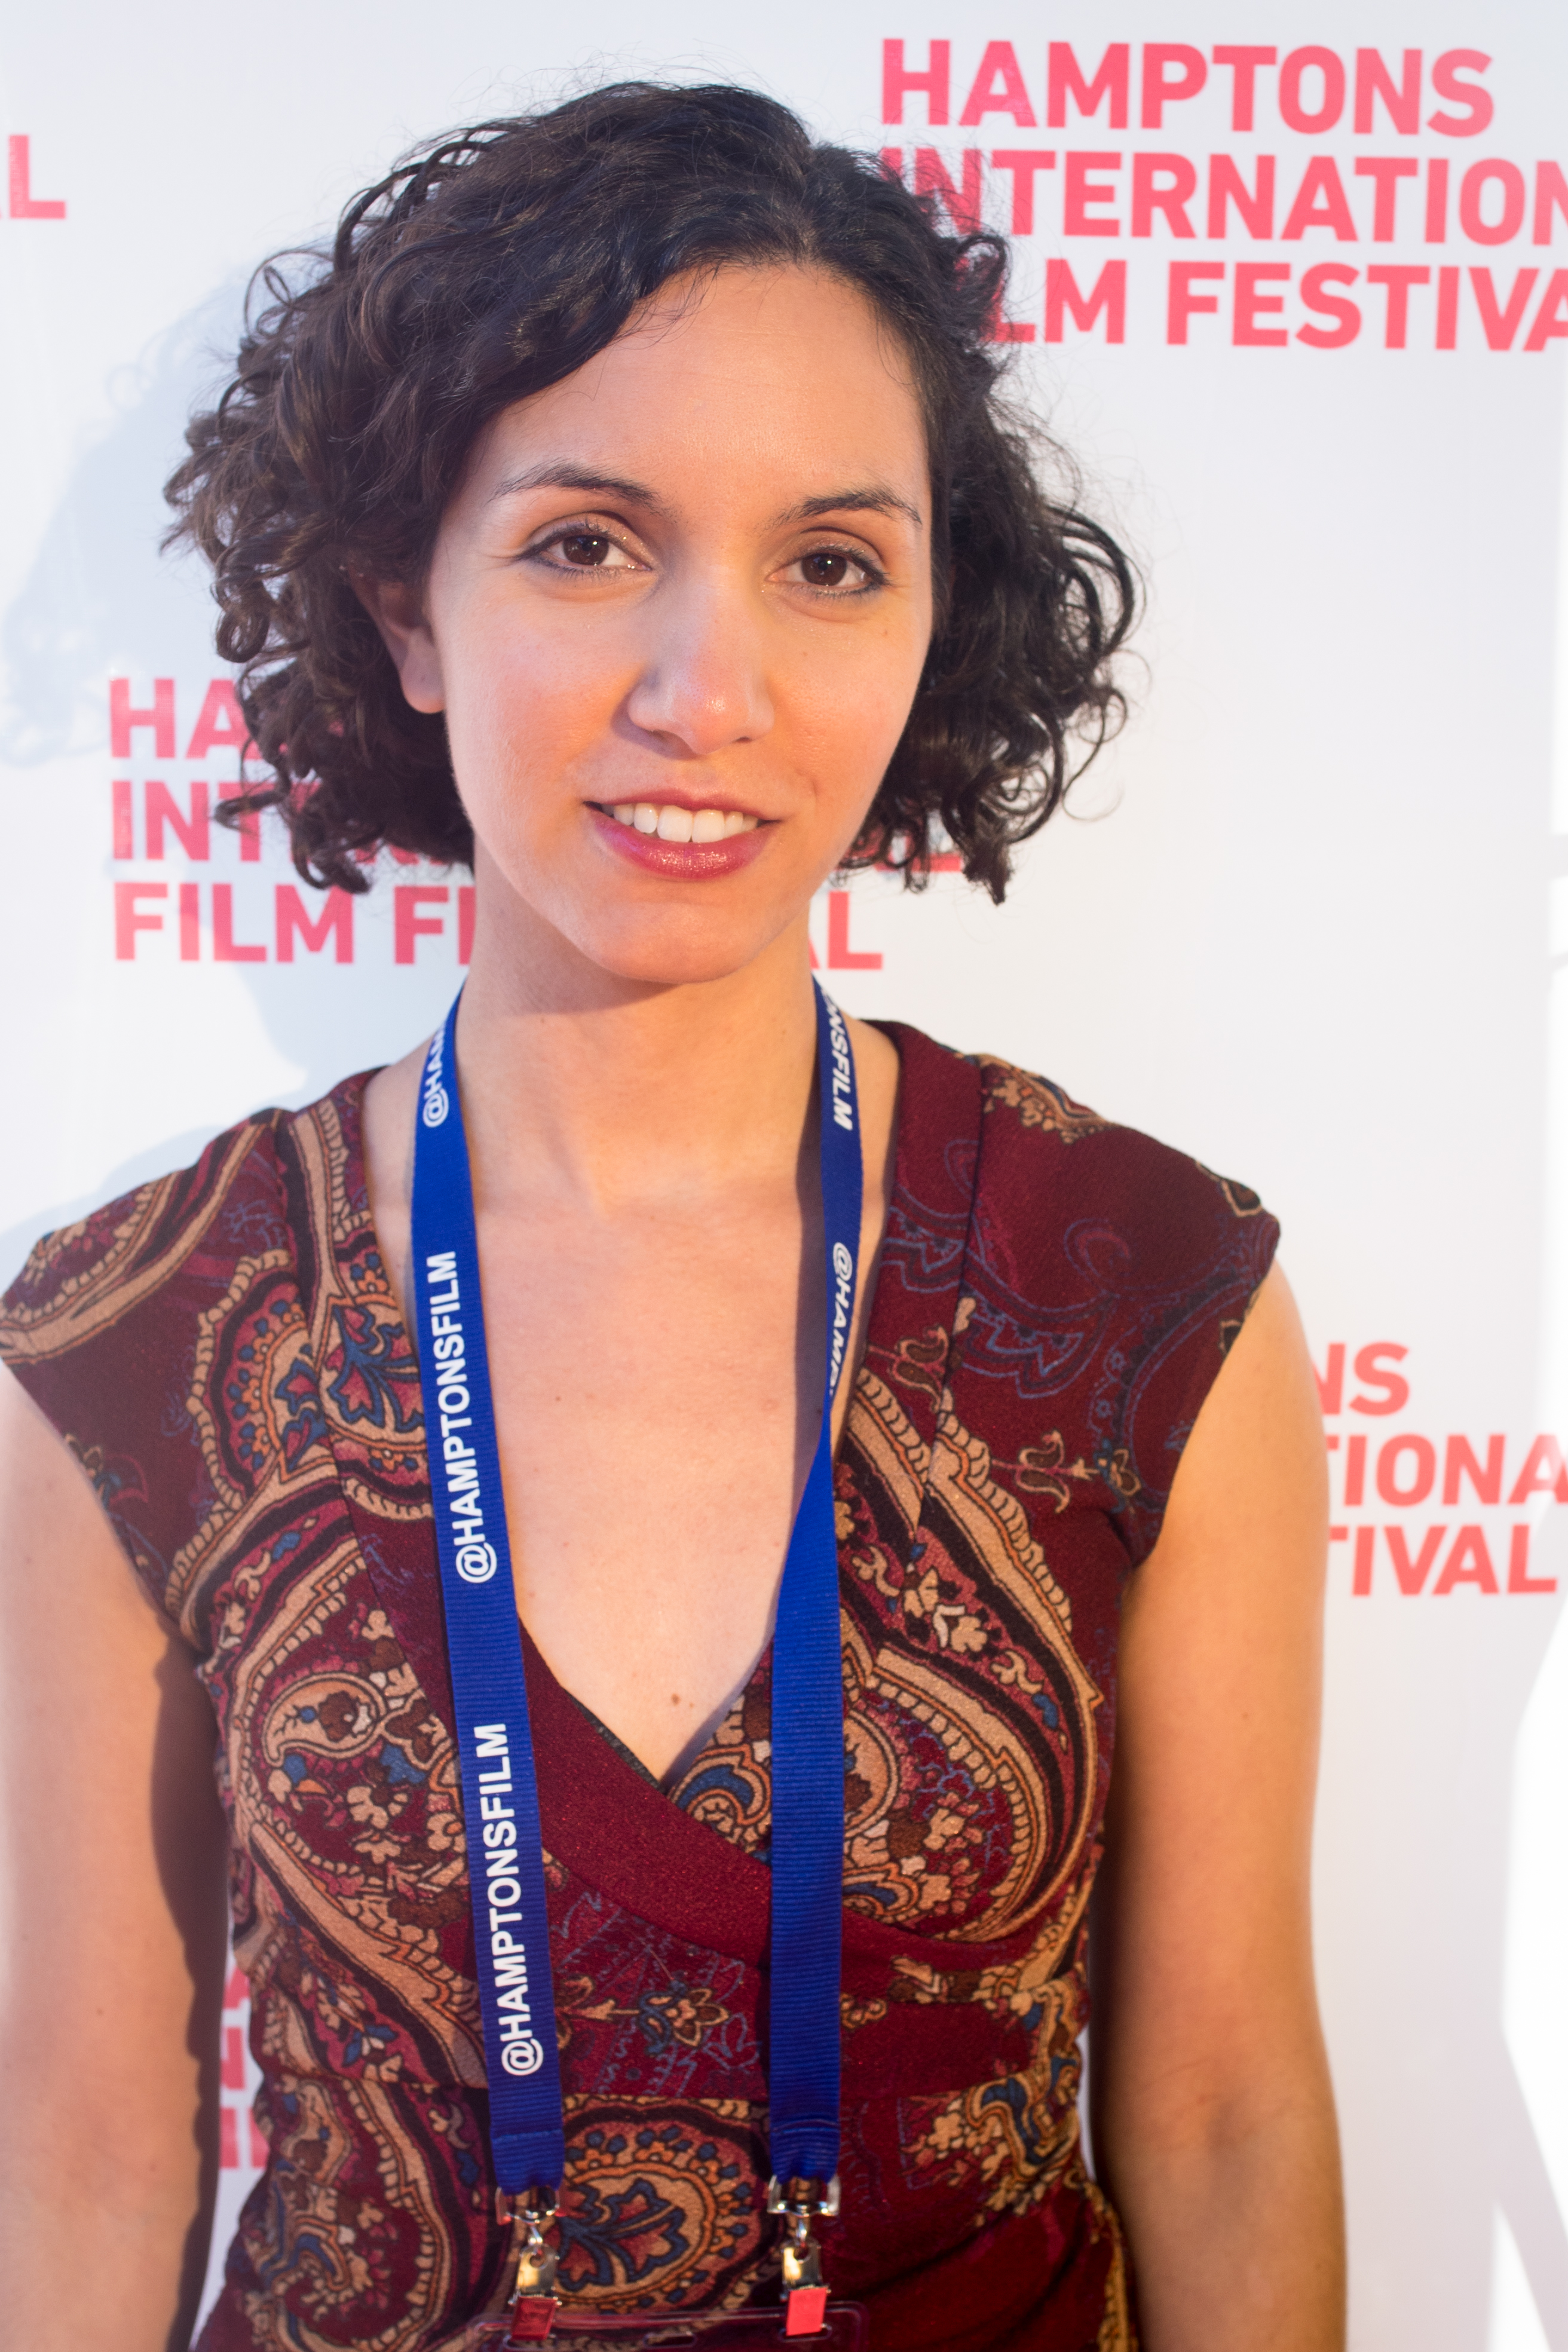 at the Hamptons International Film Festival with her film Behind The Wall